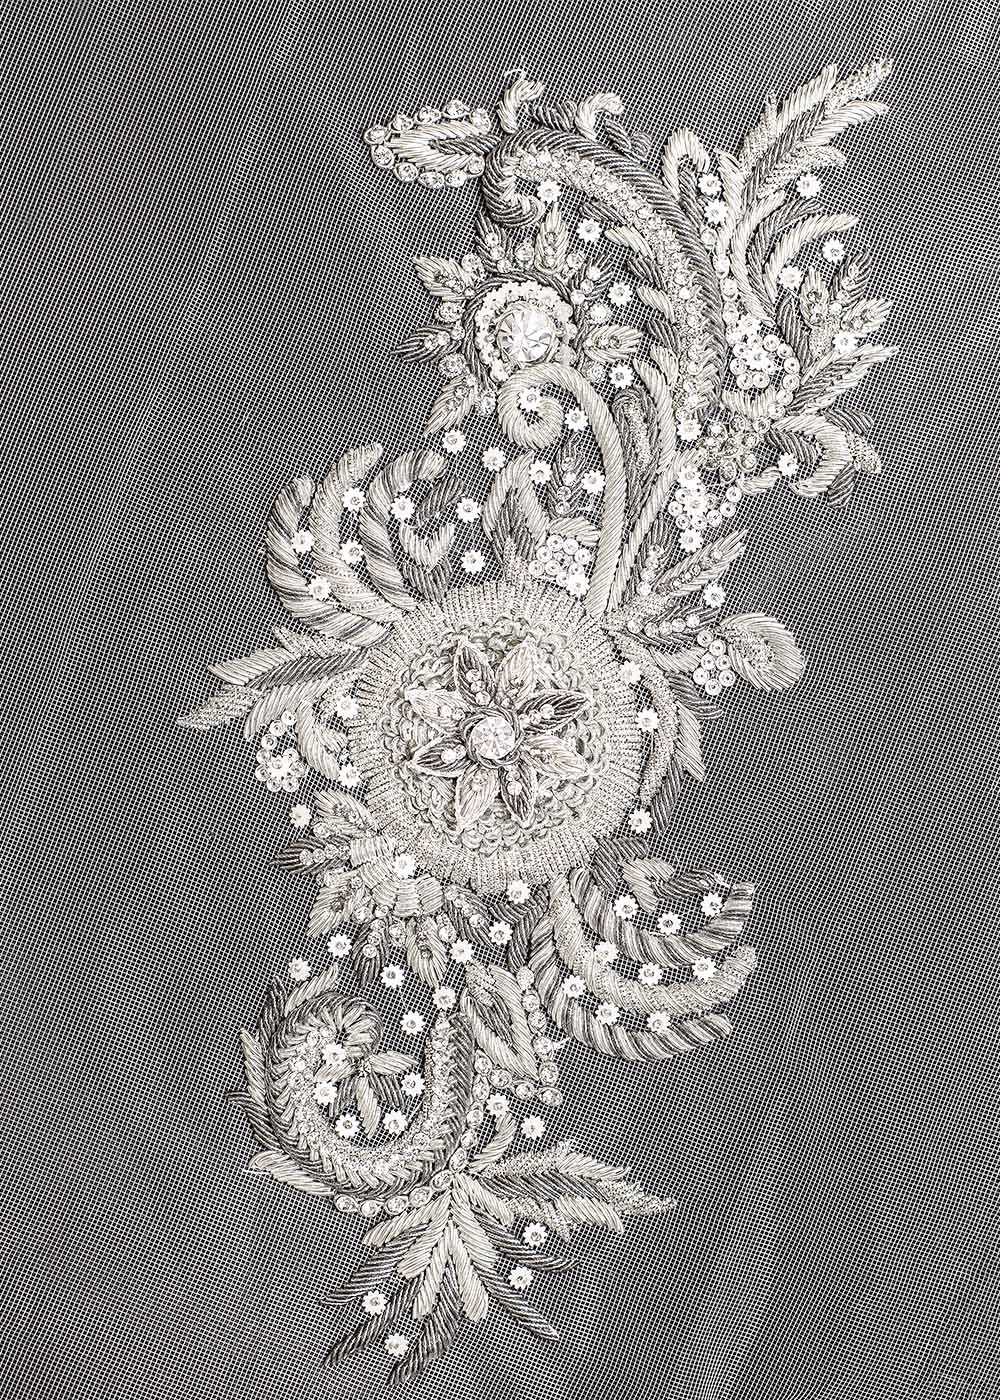 Fragment with embroidery and rhinestones to buy at the Grand Prix store